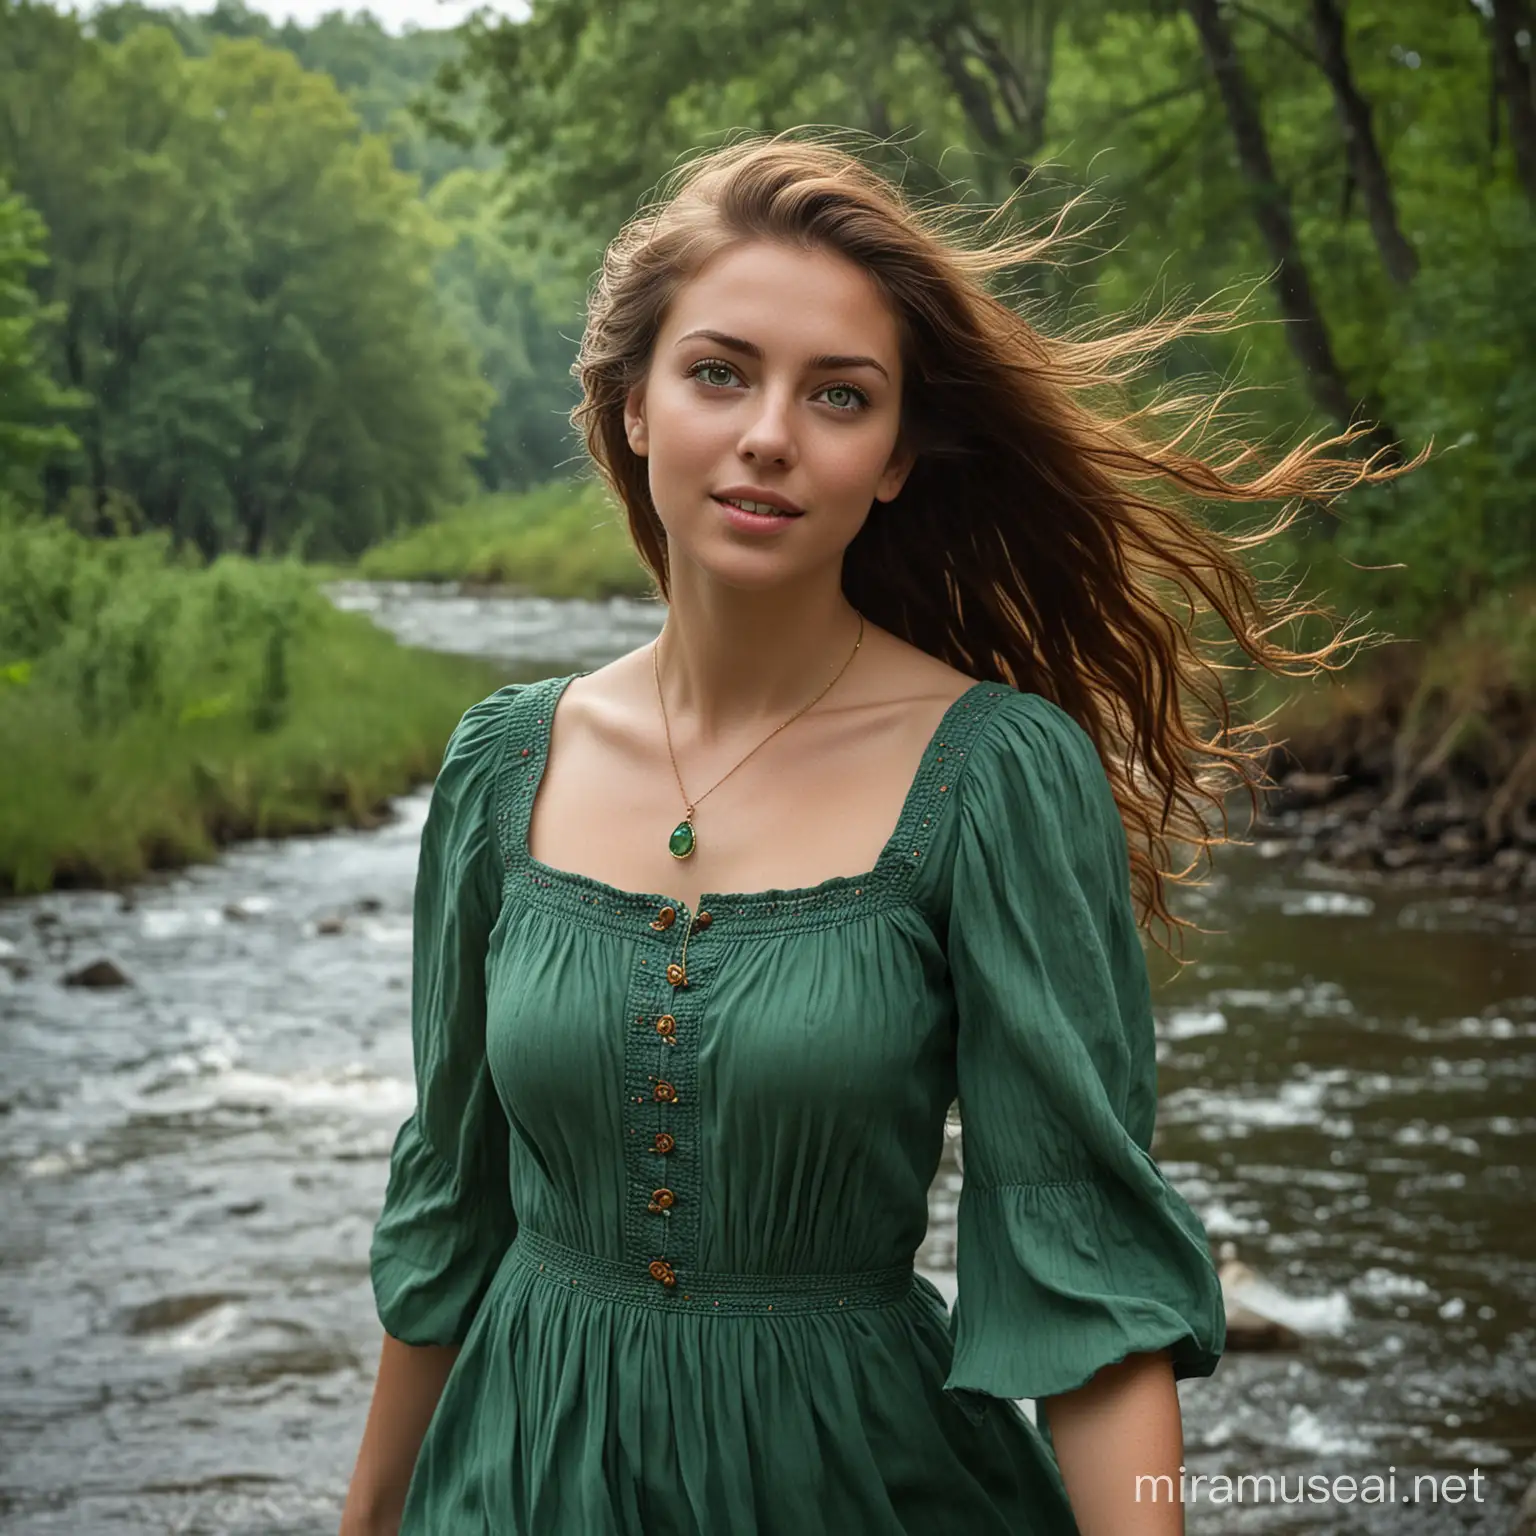 Young Woman with Brown and Red Hair in Green Peasant Dress by River in Forest